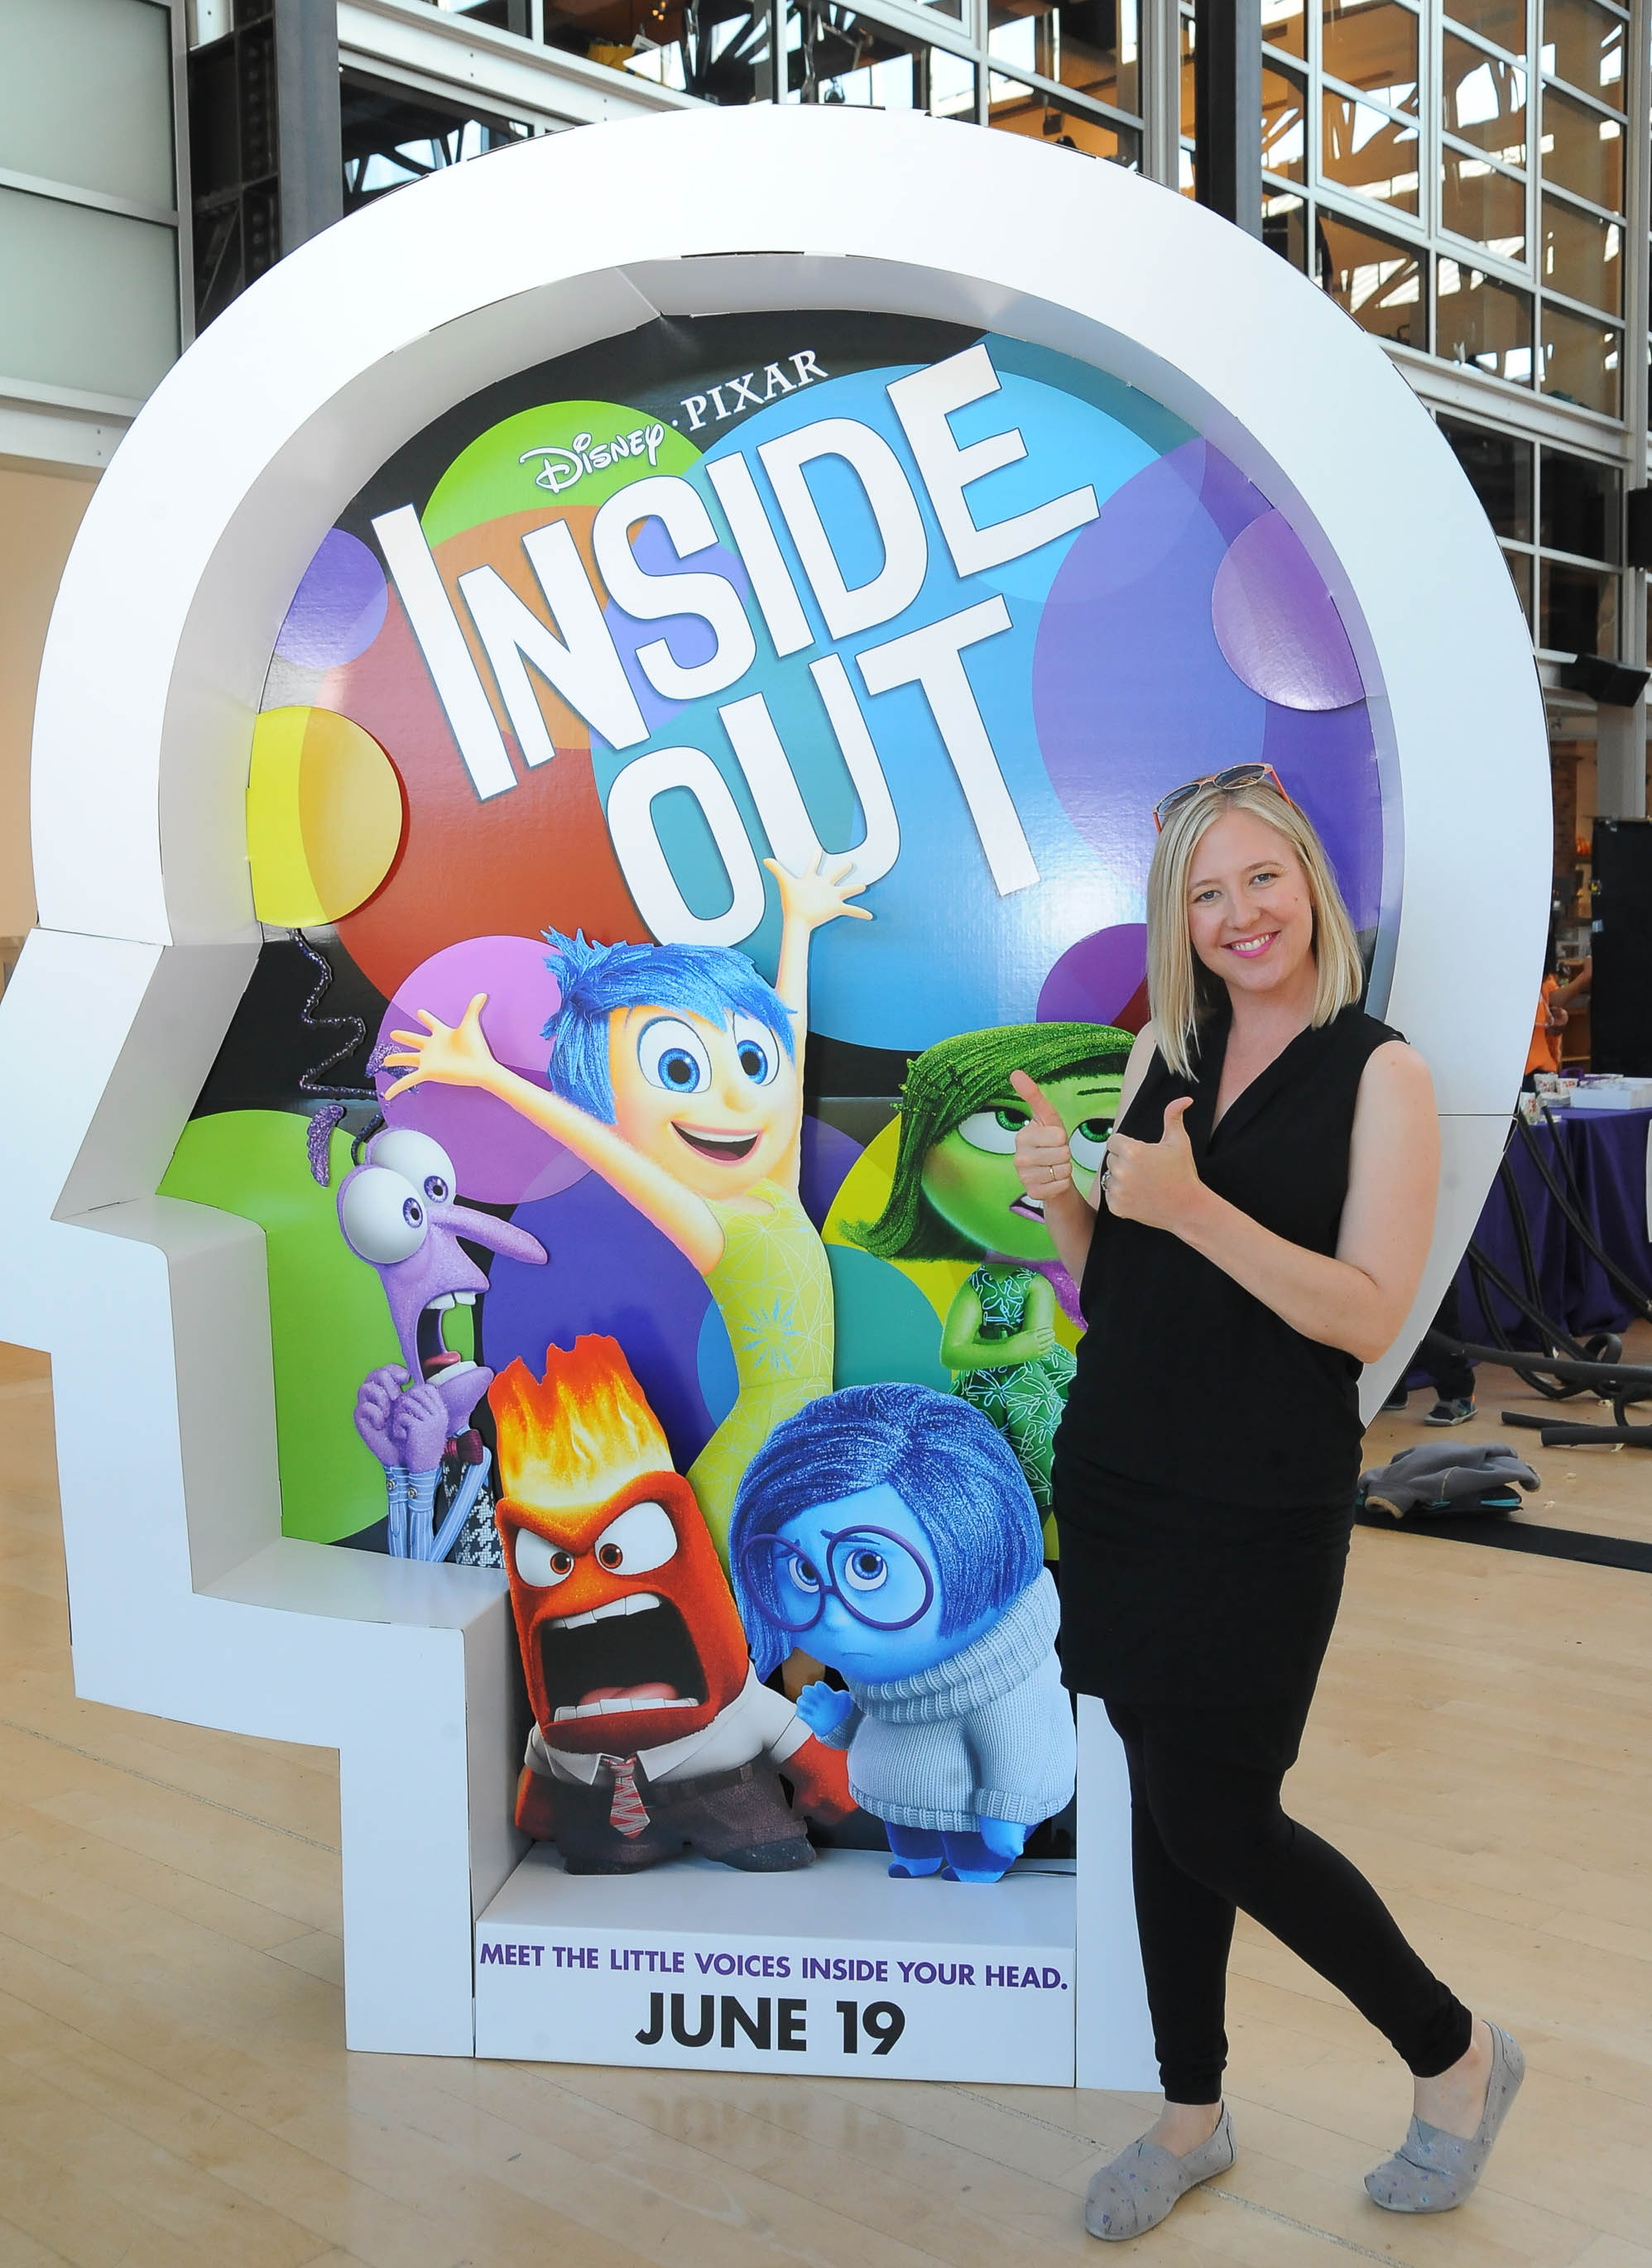 Warp says the new Pixar film "Inside Out" is the perfect backdrop to launch Kizoom's most ambitious game yet.